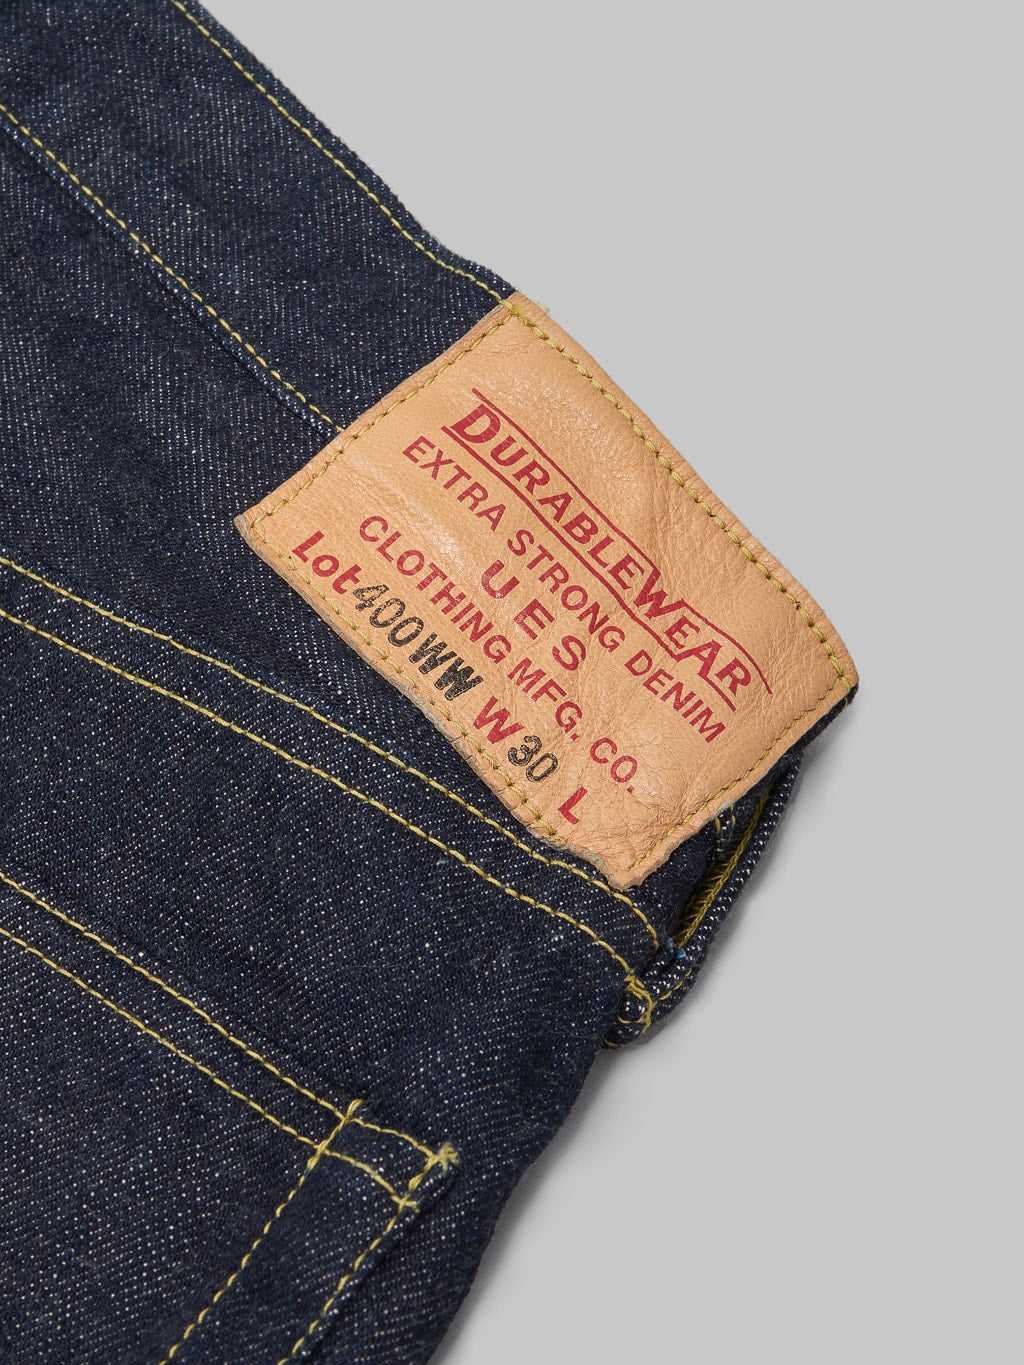 UES 400 WW Post World War Regular Straight Jeans leather patch